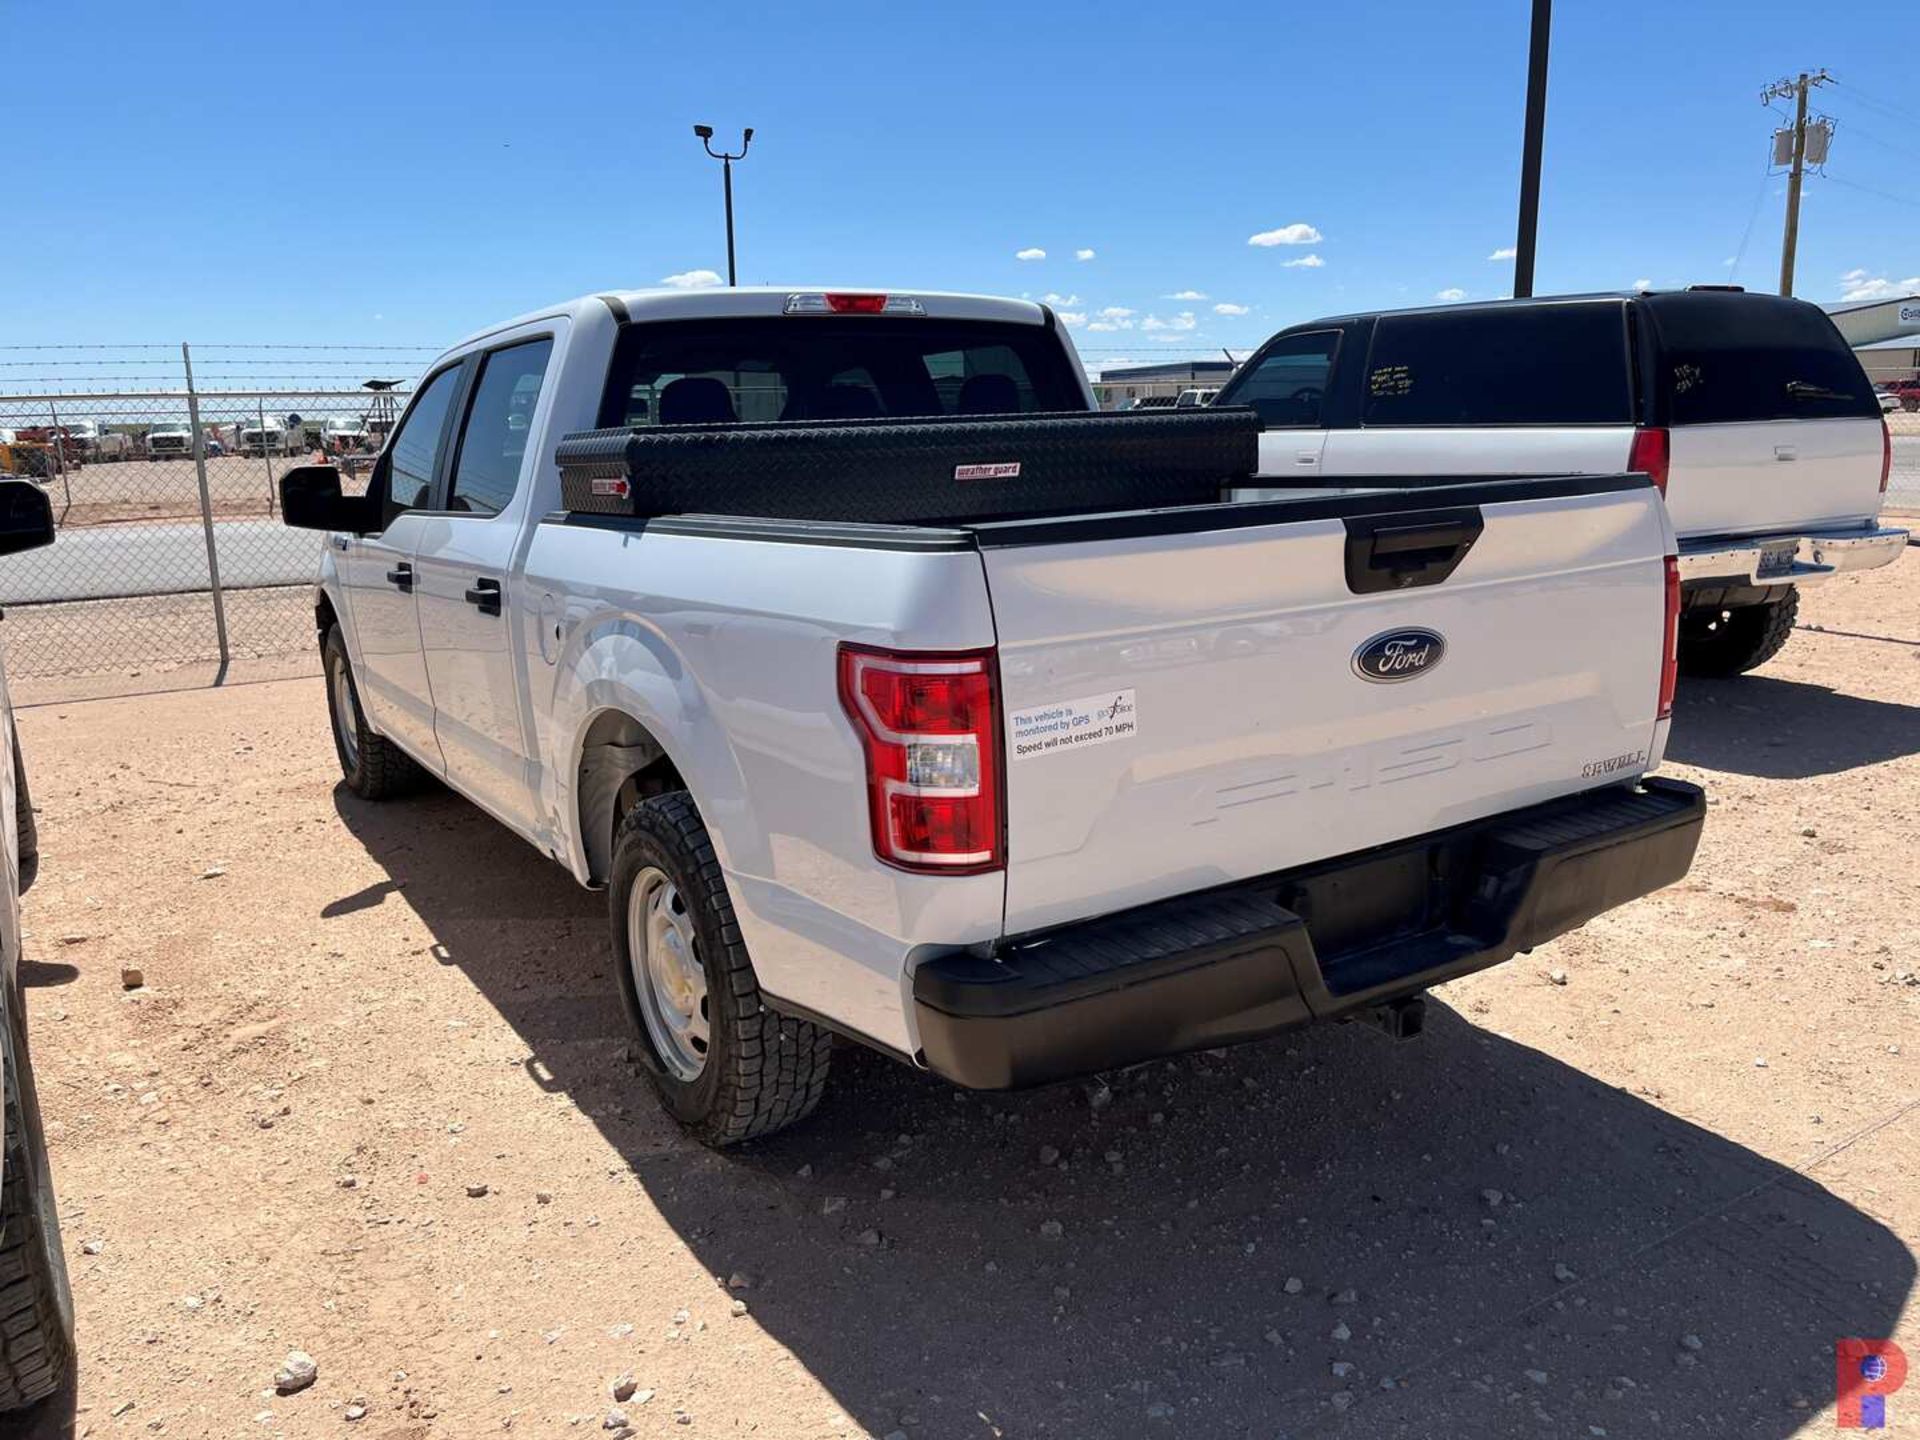 2019 FORD F-150 CREW CAB PICKUP TRUCK - Image 8 of 12